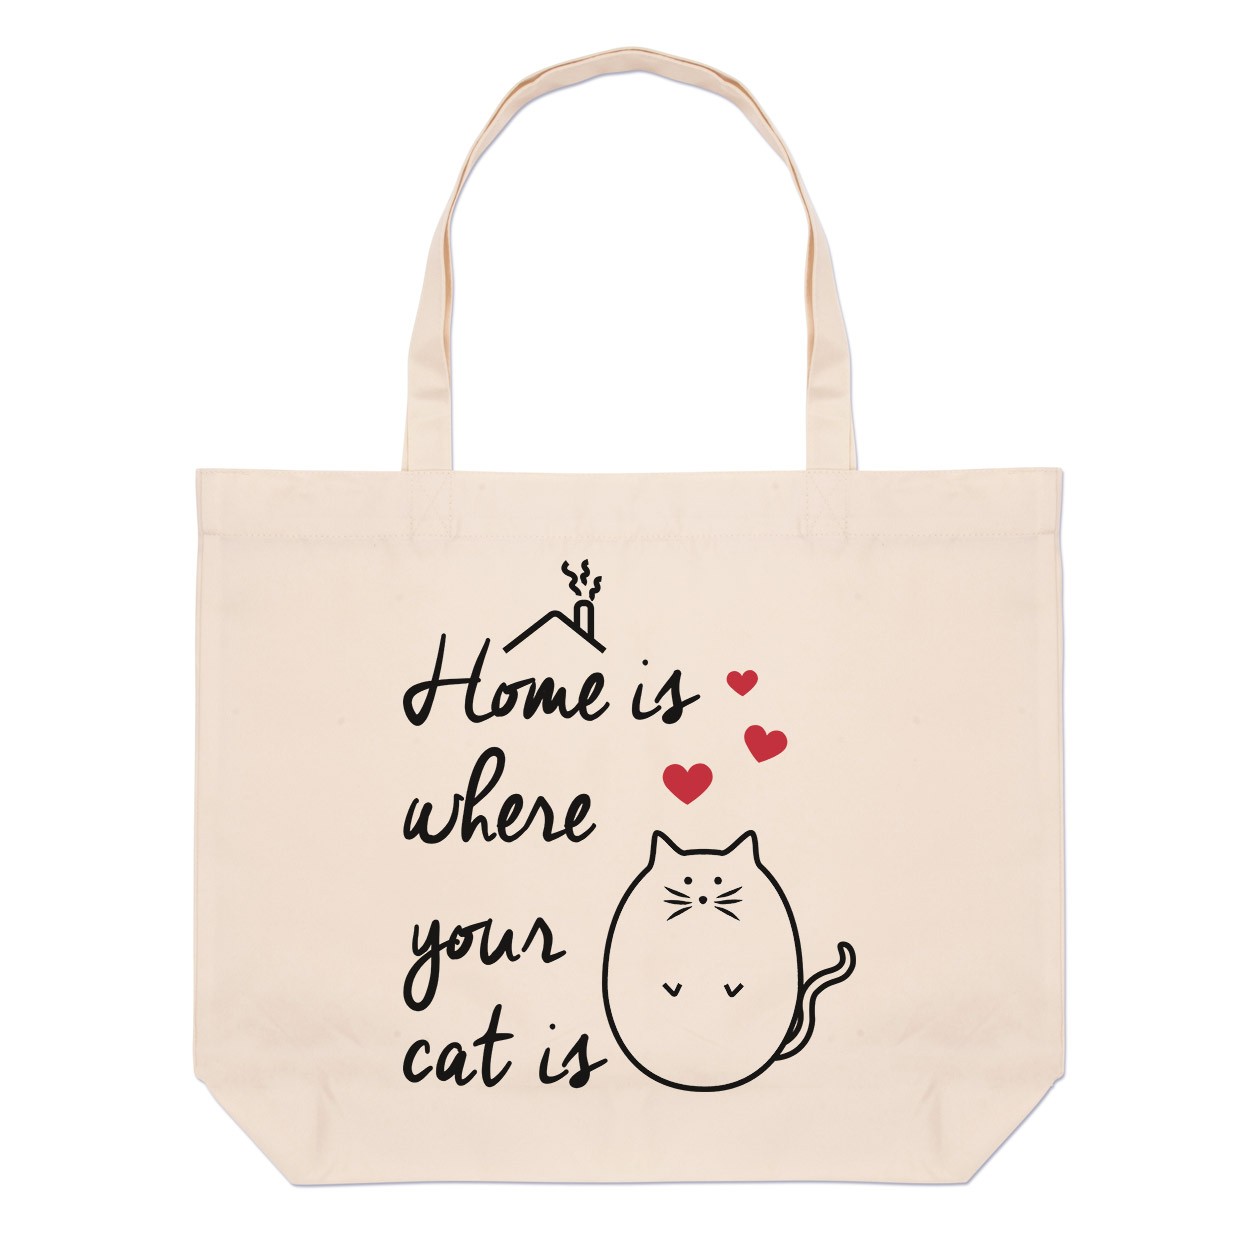 Home Is Where Your Cat Is Large Beach Tote Bag